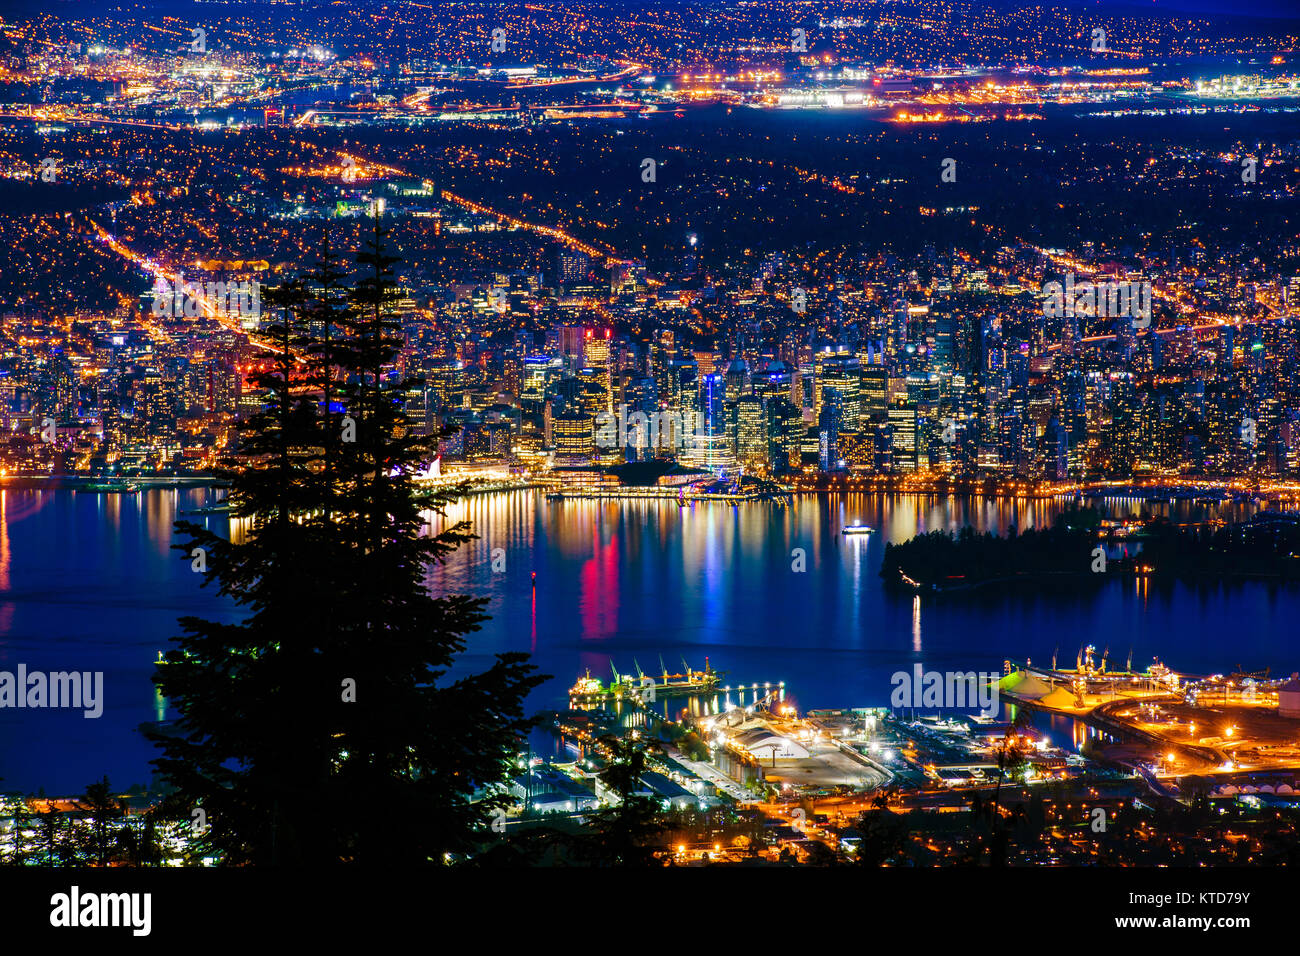 Aerial view of Vancouver city by night, British Columbia, Canada. Photographed from the top of the Grouse Mountain. Stock Photo